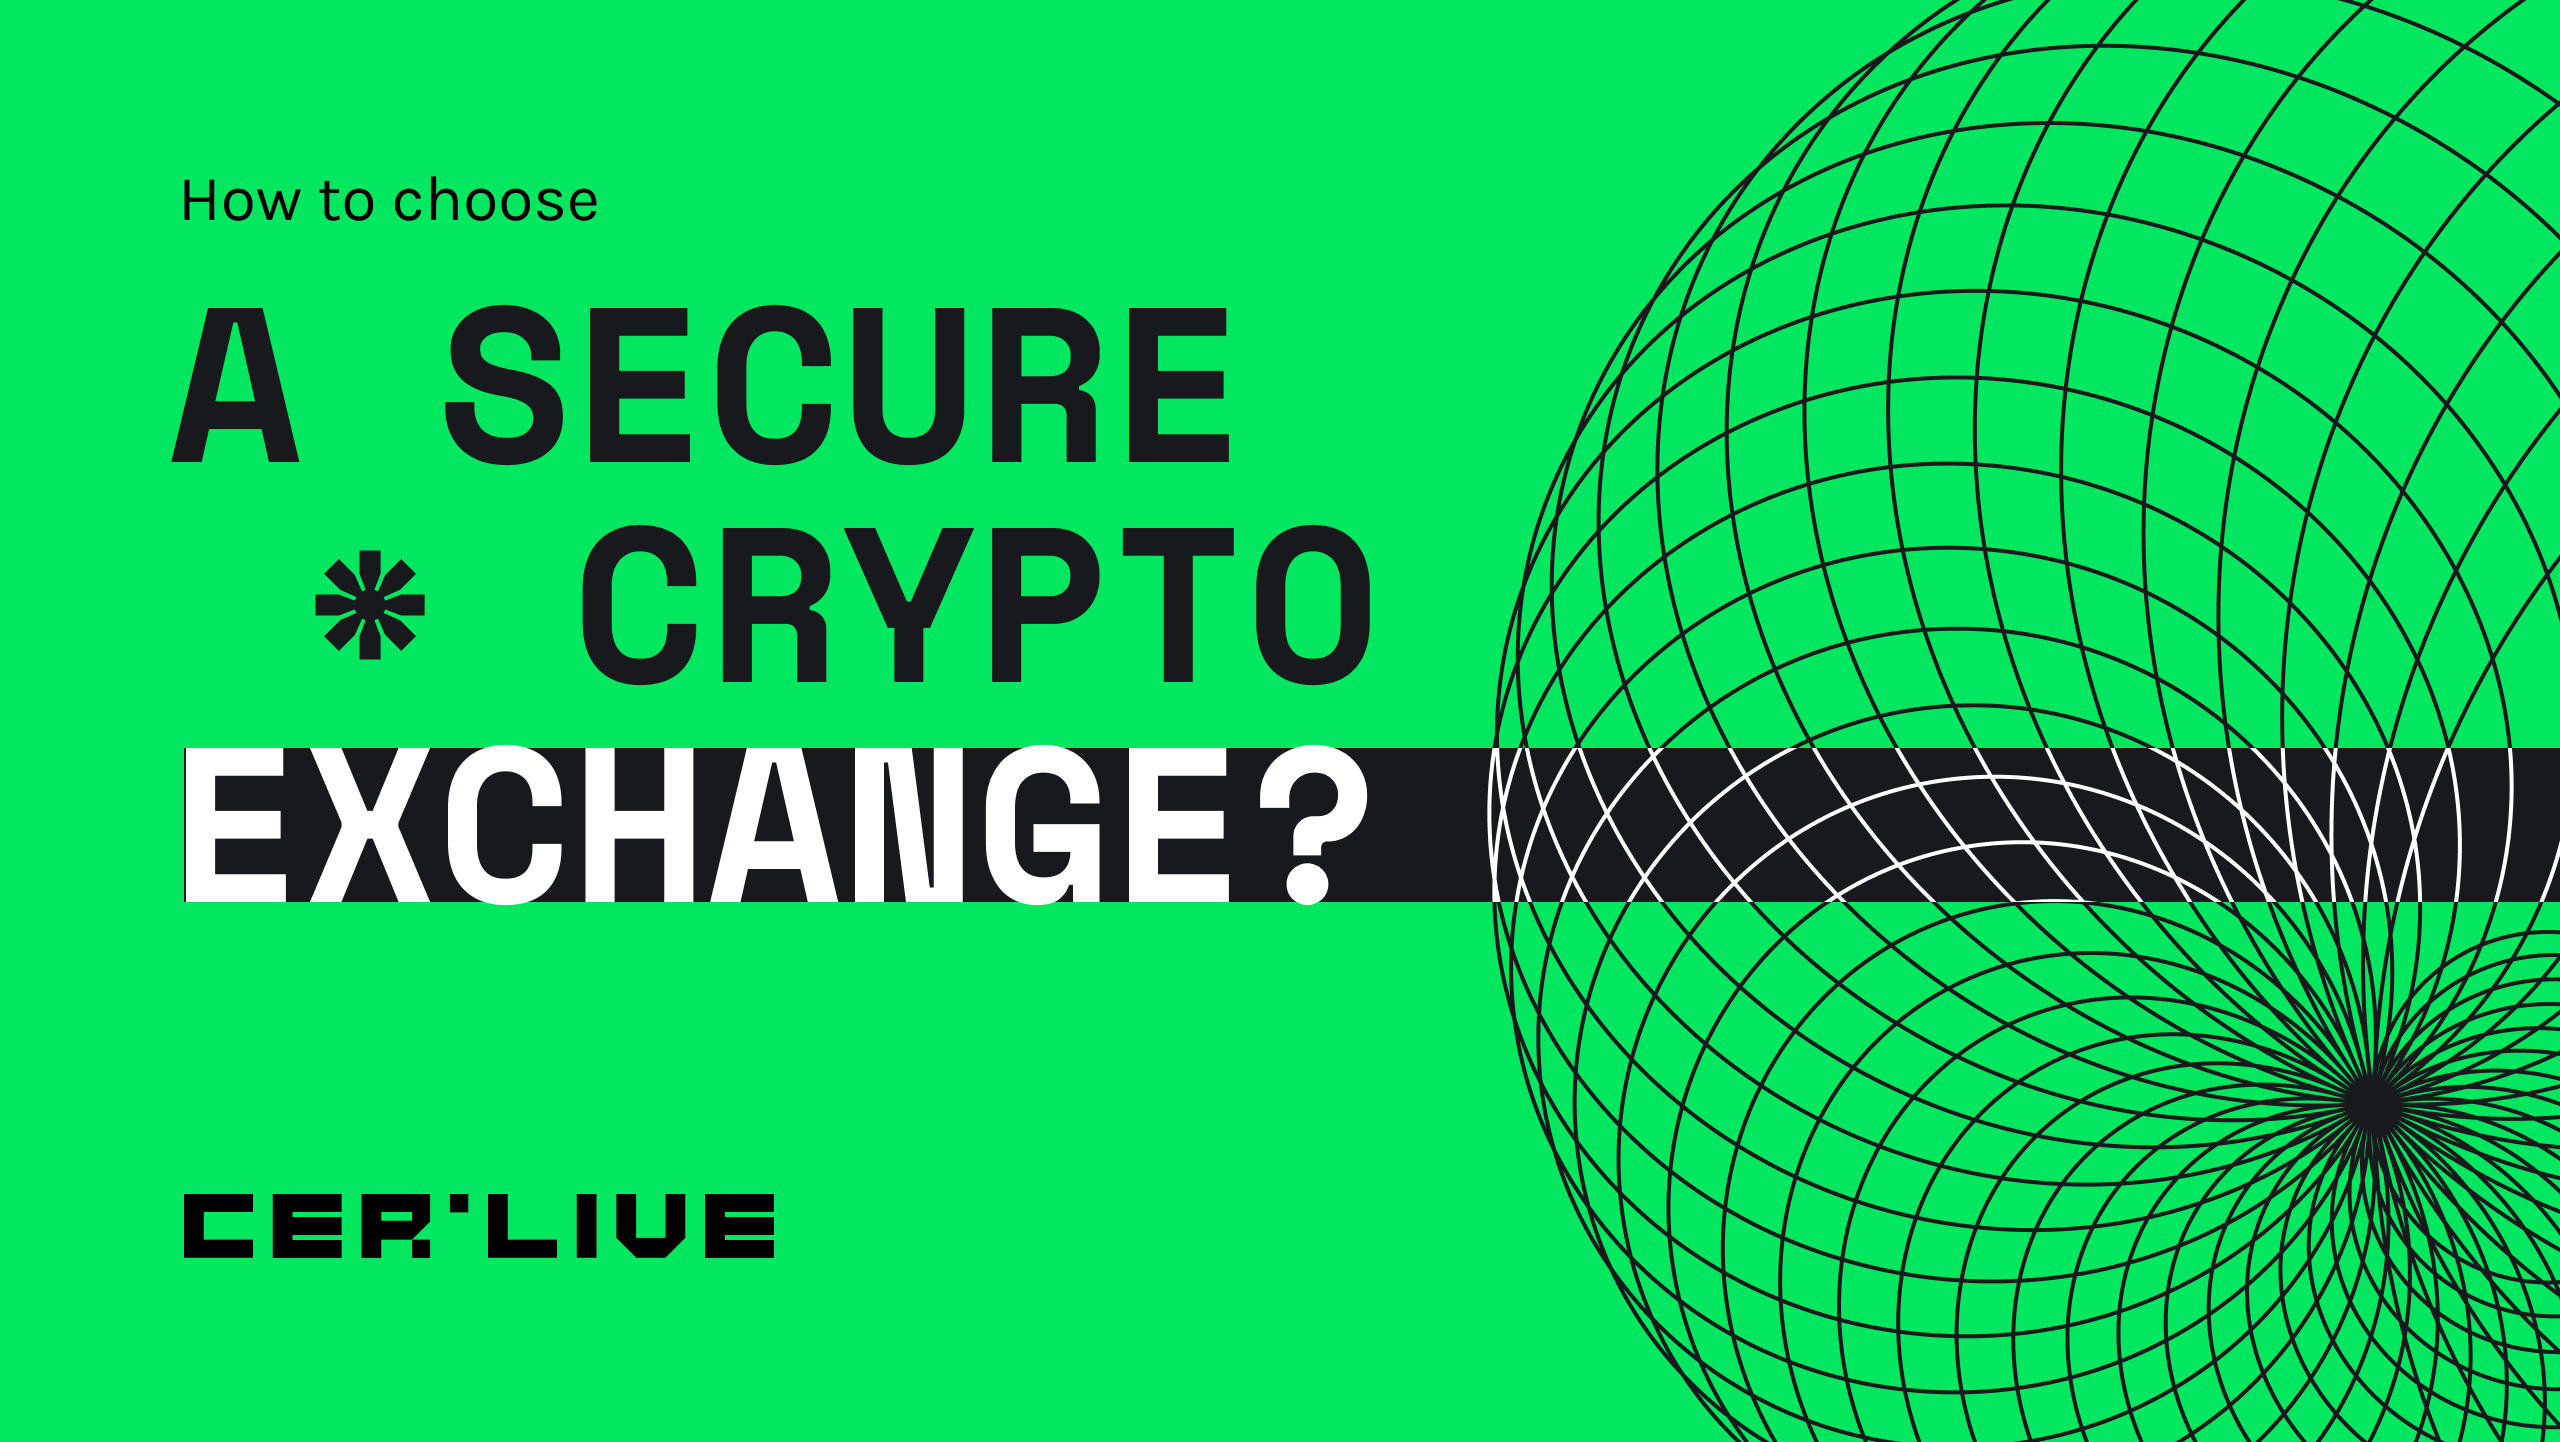 How to choose a secure crypto exchange? image